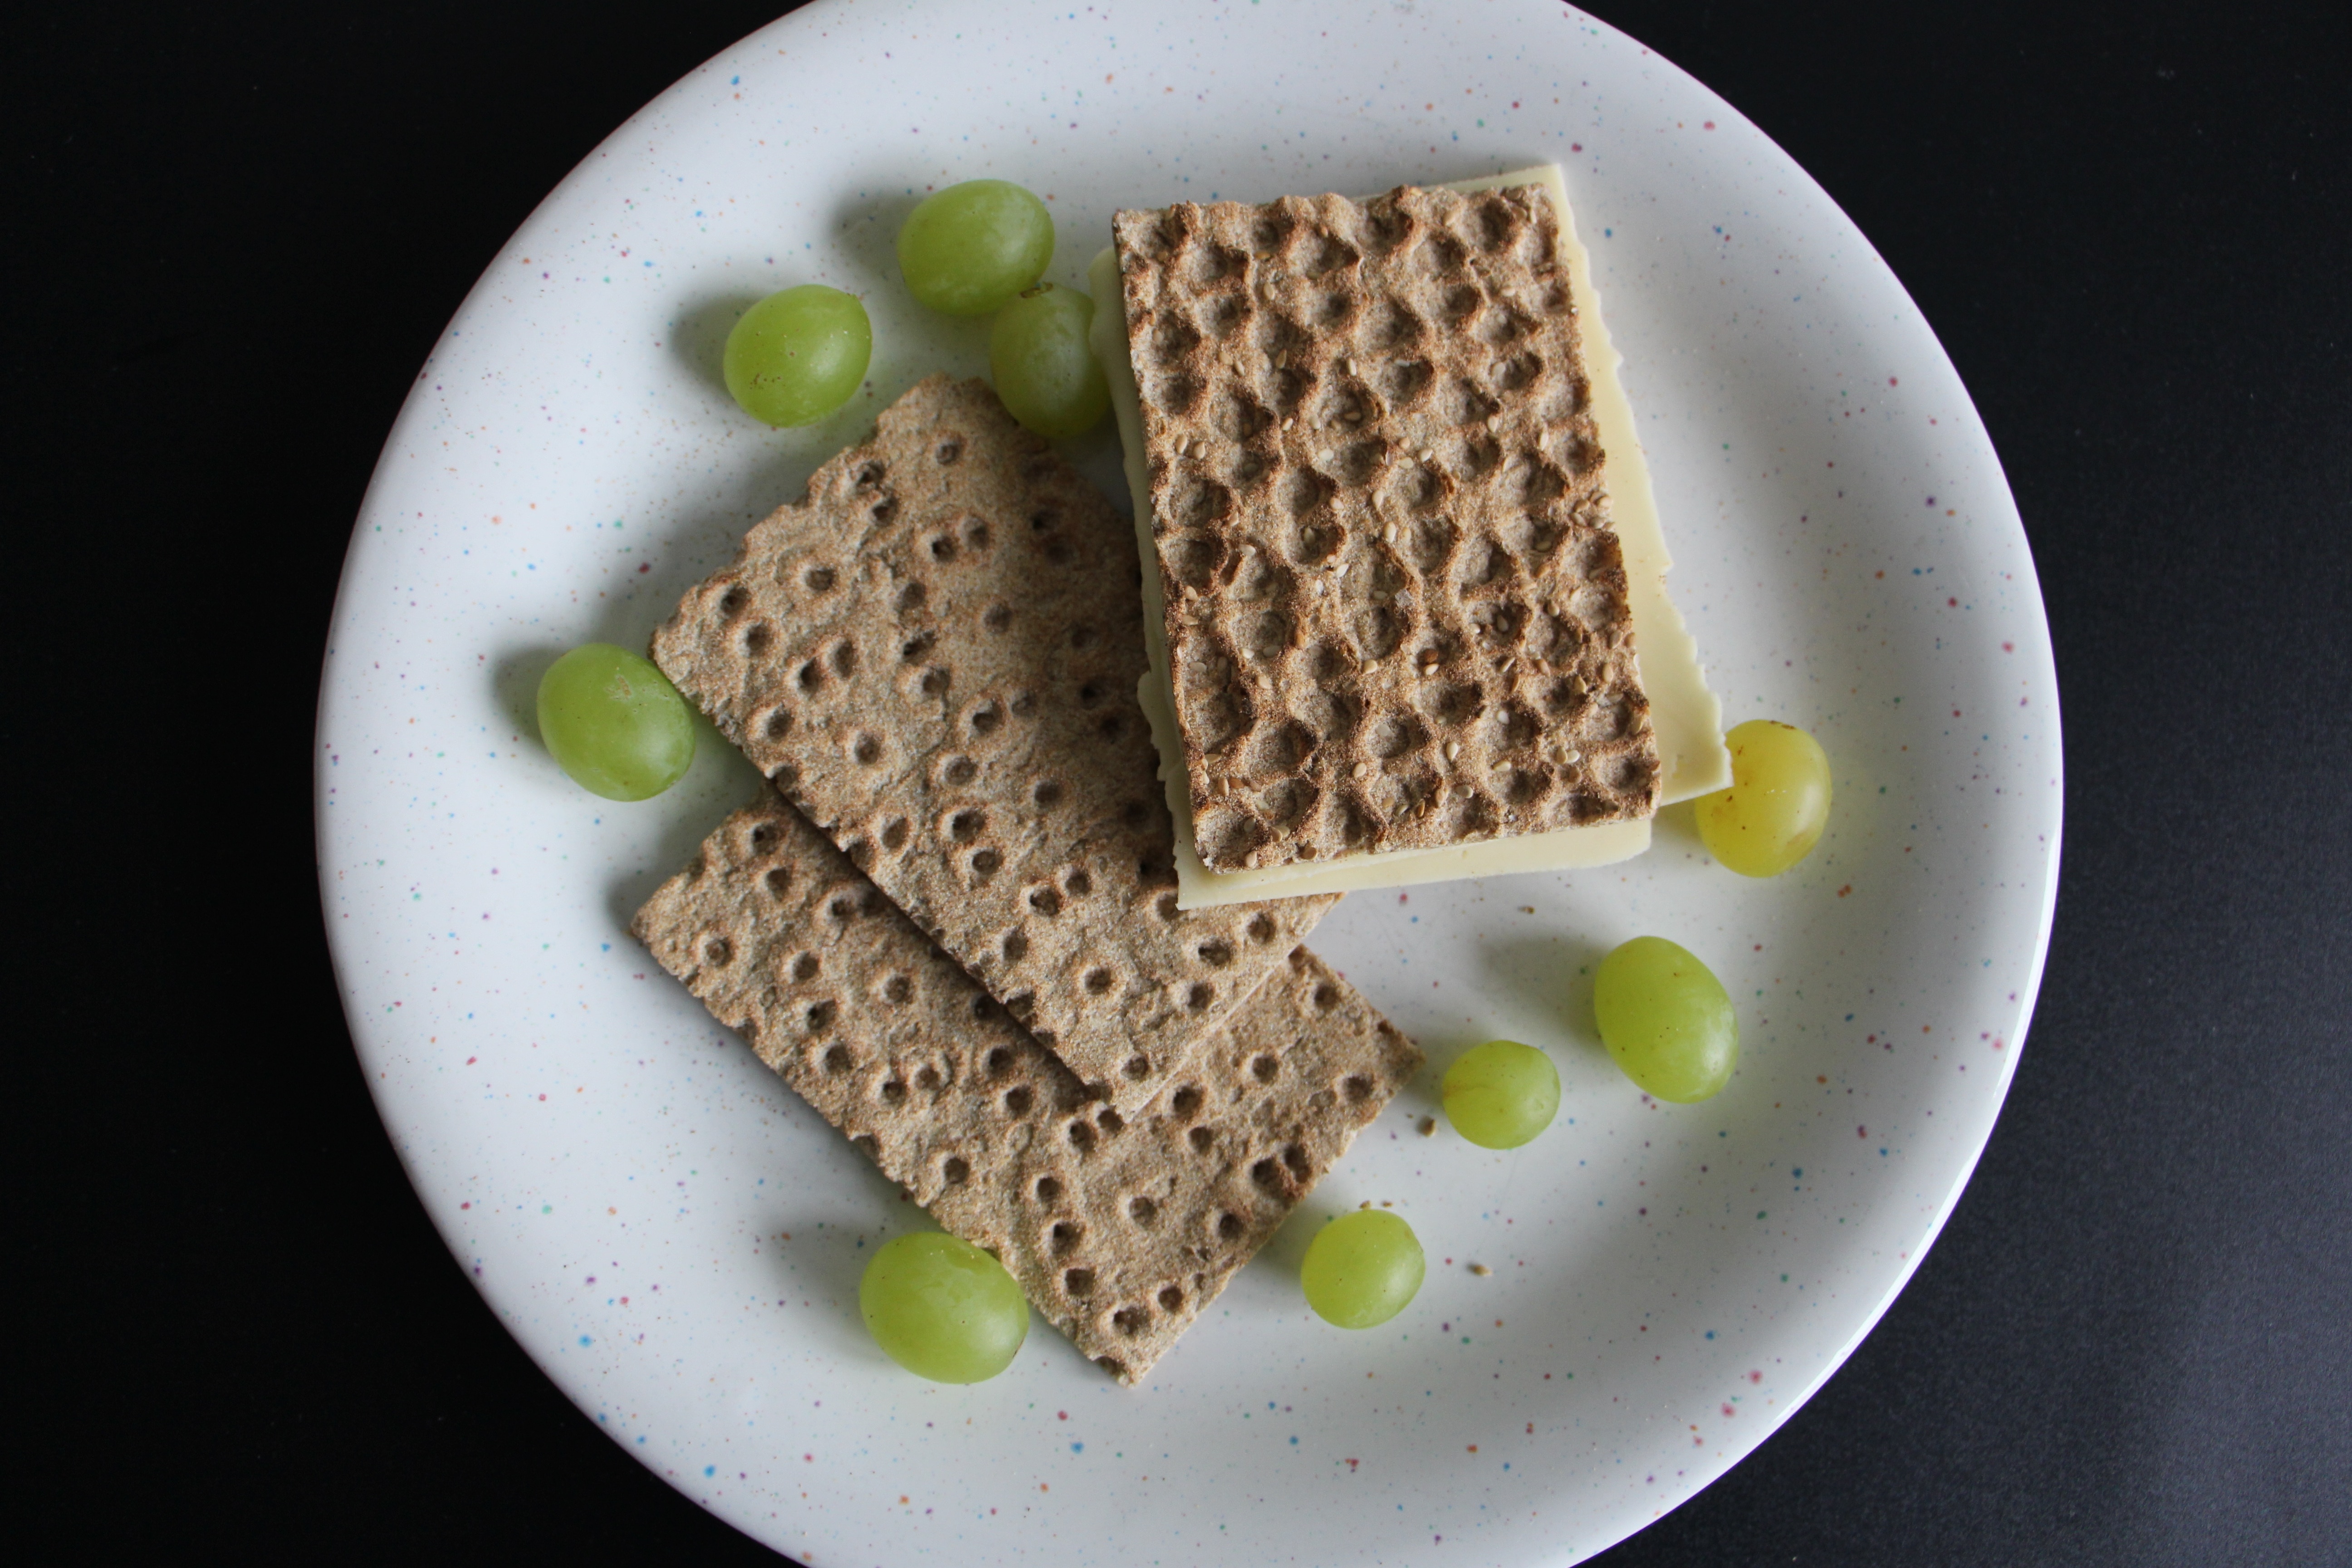 three white wafers and green grapes on white plate